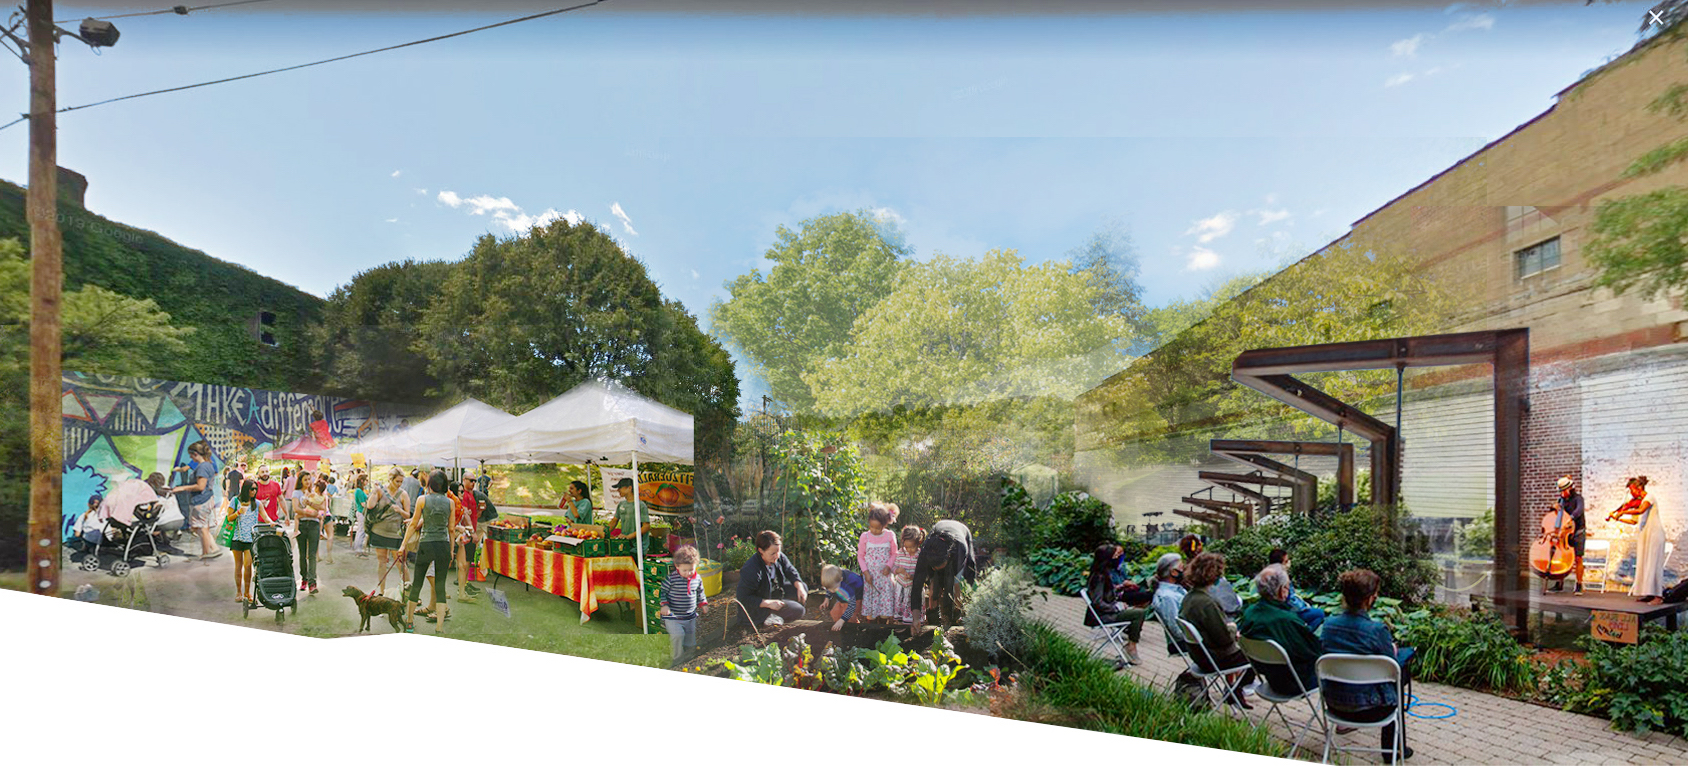 Montage image of proposed Braddock Community Park showing people in market stalls, performance area, and garden